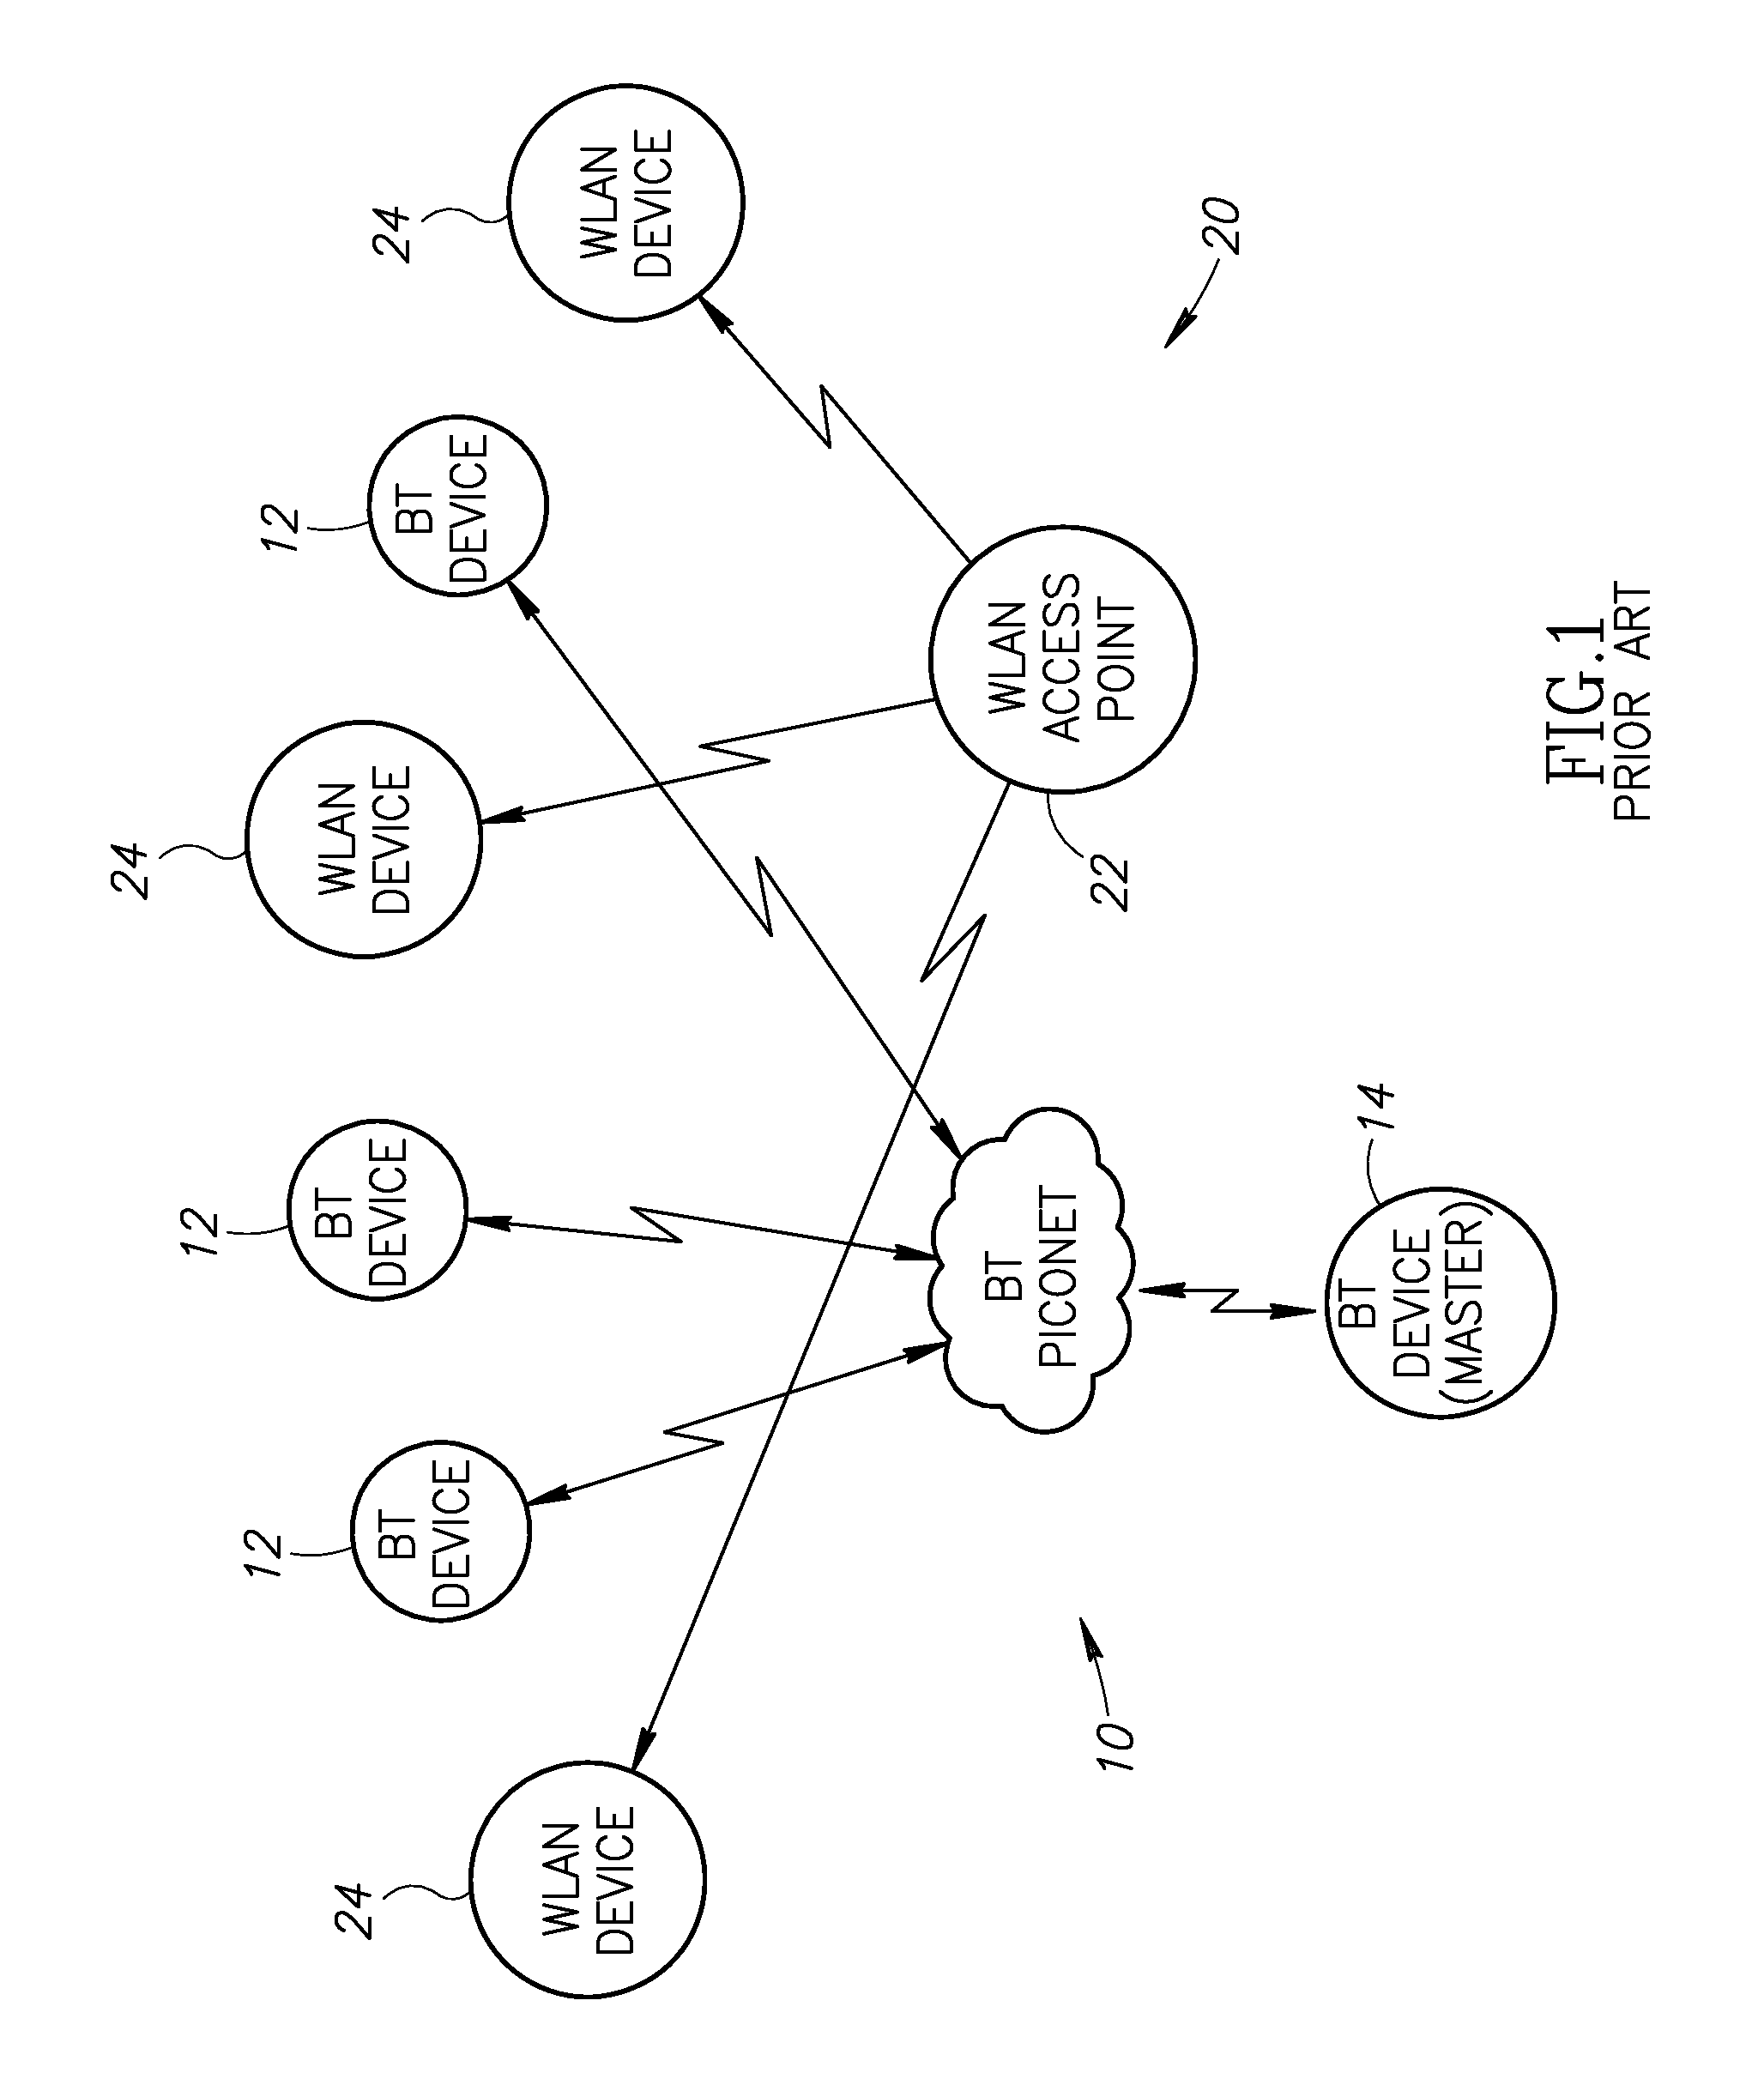 Range Extension and Noise Mitigation For Wireless Communication Links Utilizing a CRC Based Single and Multiple Bit Error Correction Mechanism